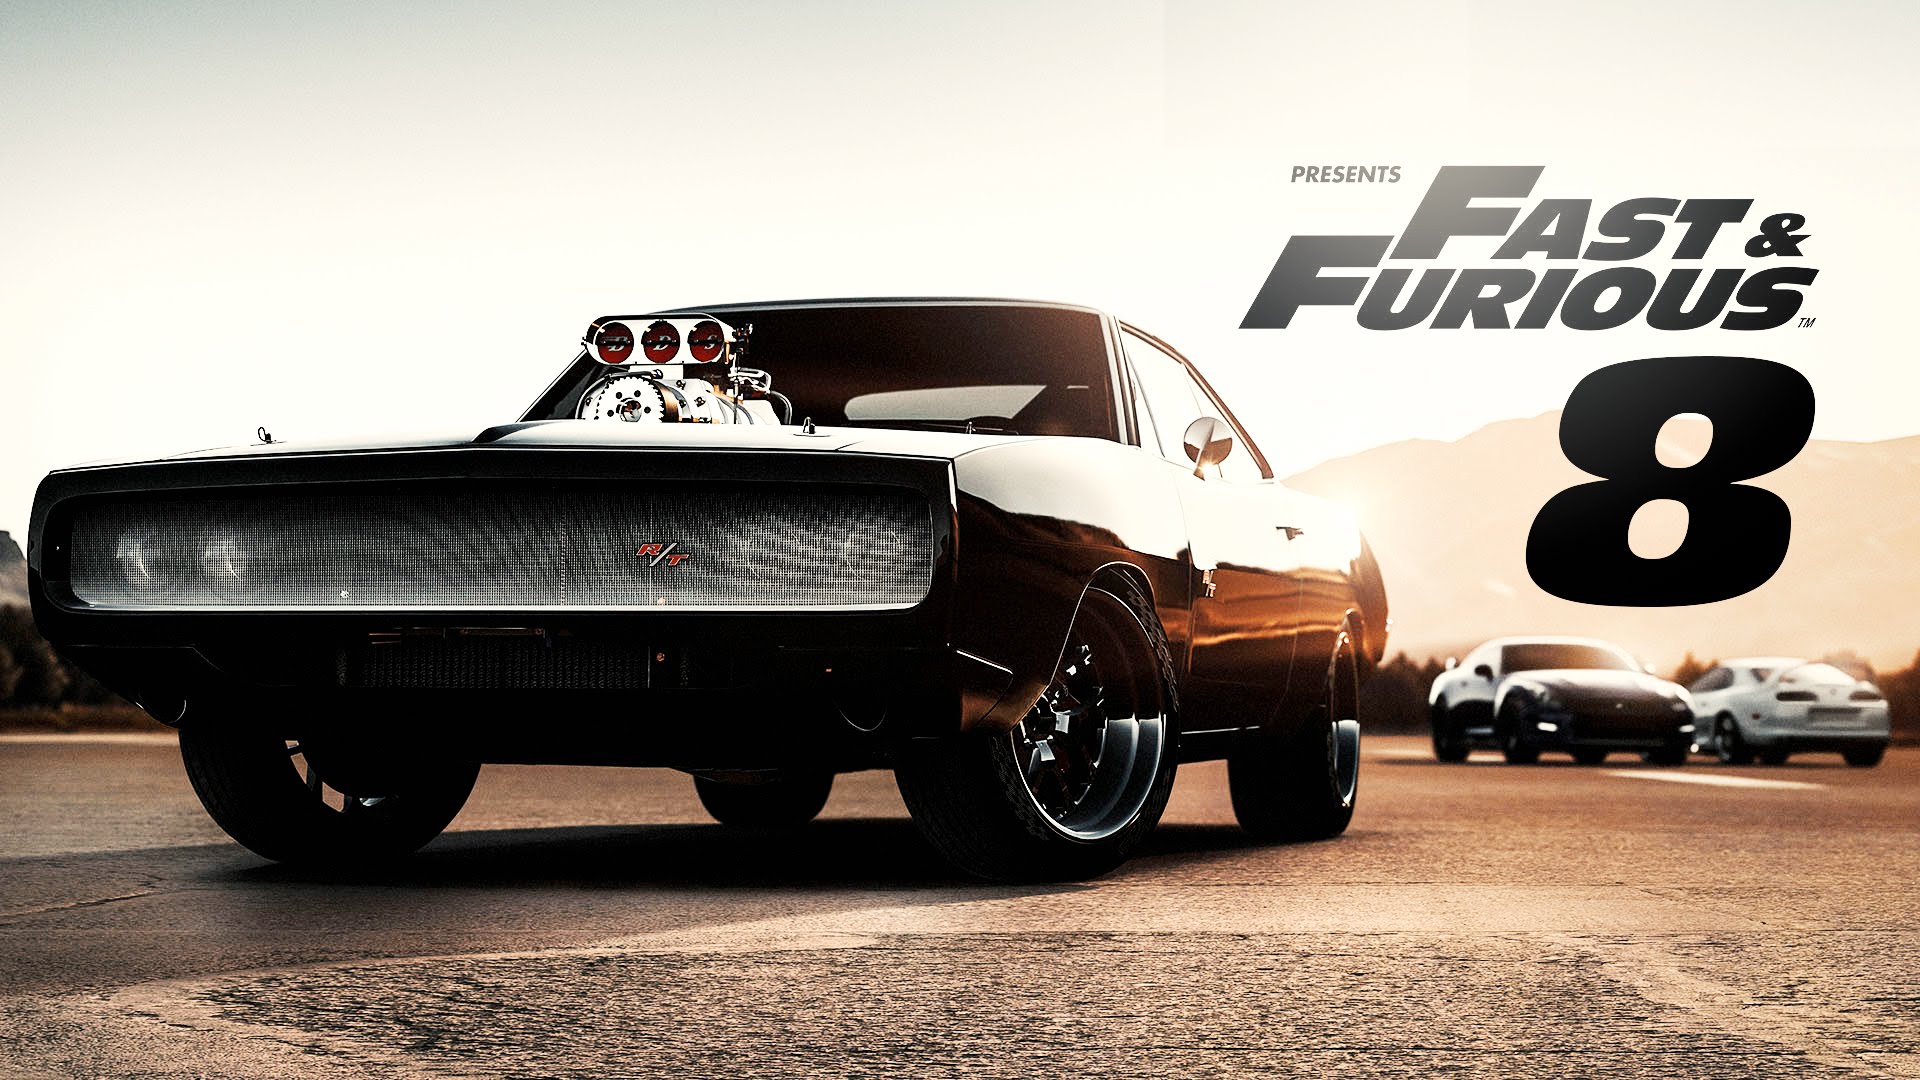 High Resolution Wallpaper | The Fate Of The Furious 1920x1080 px